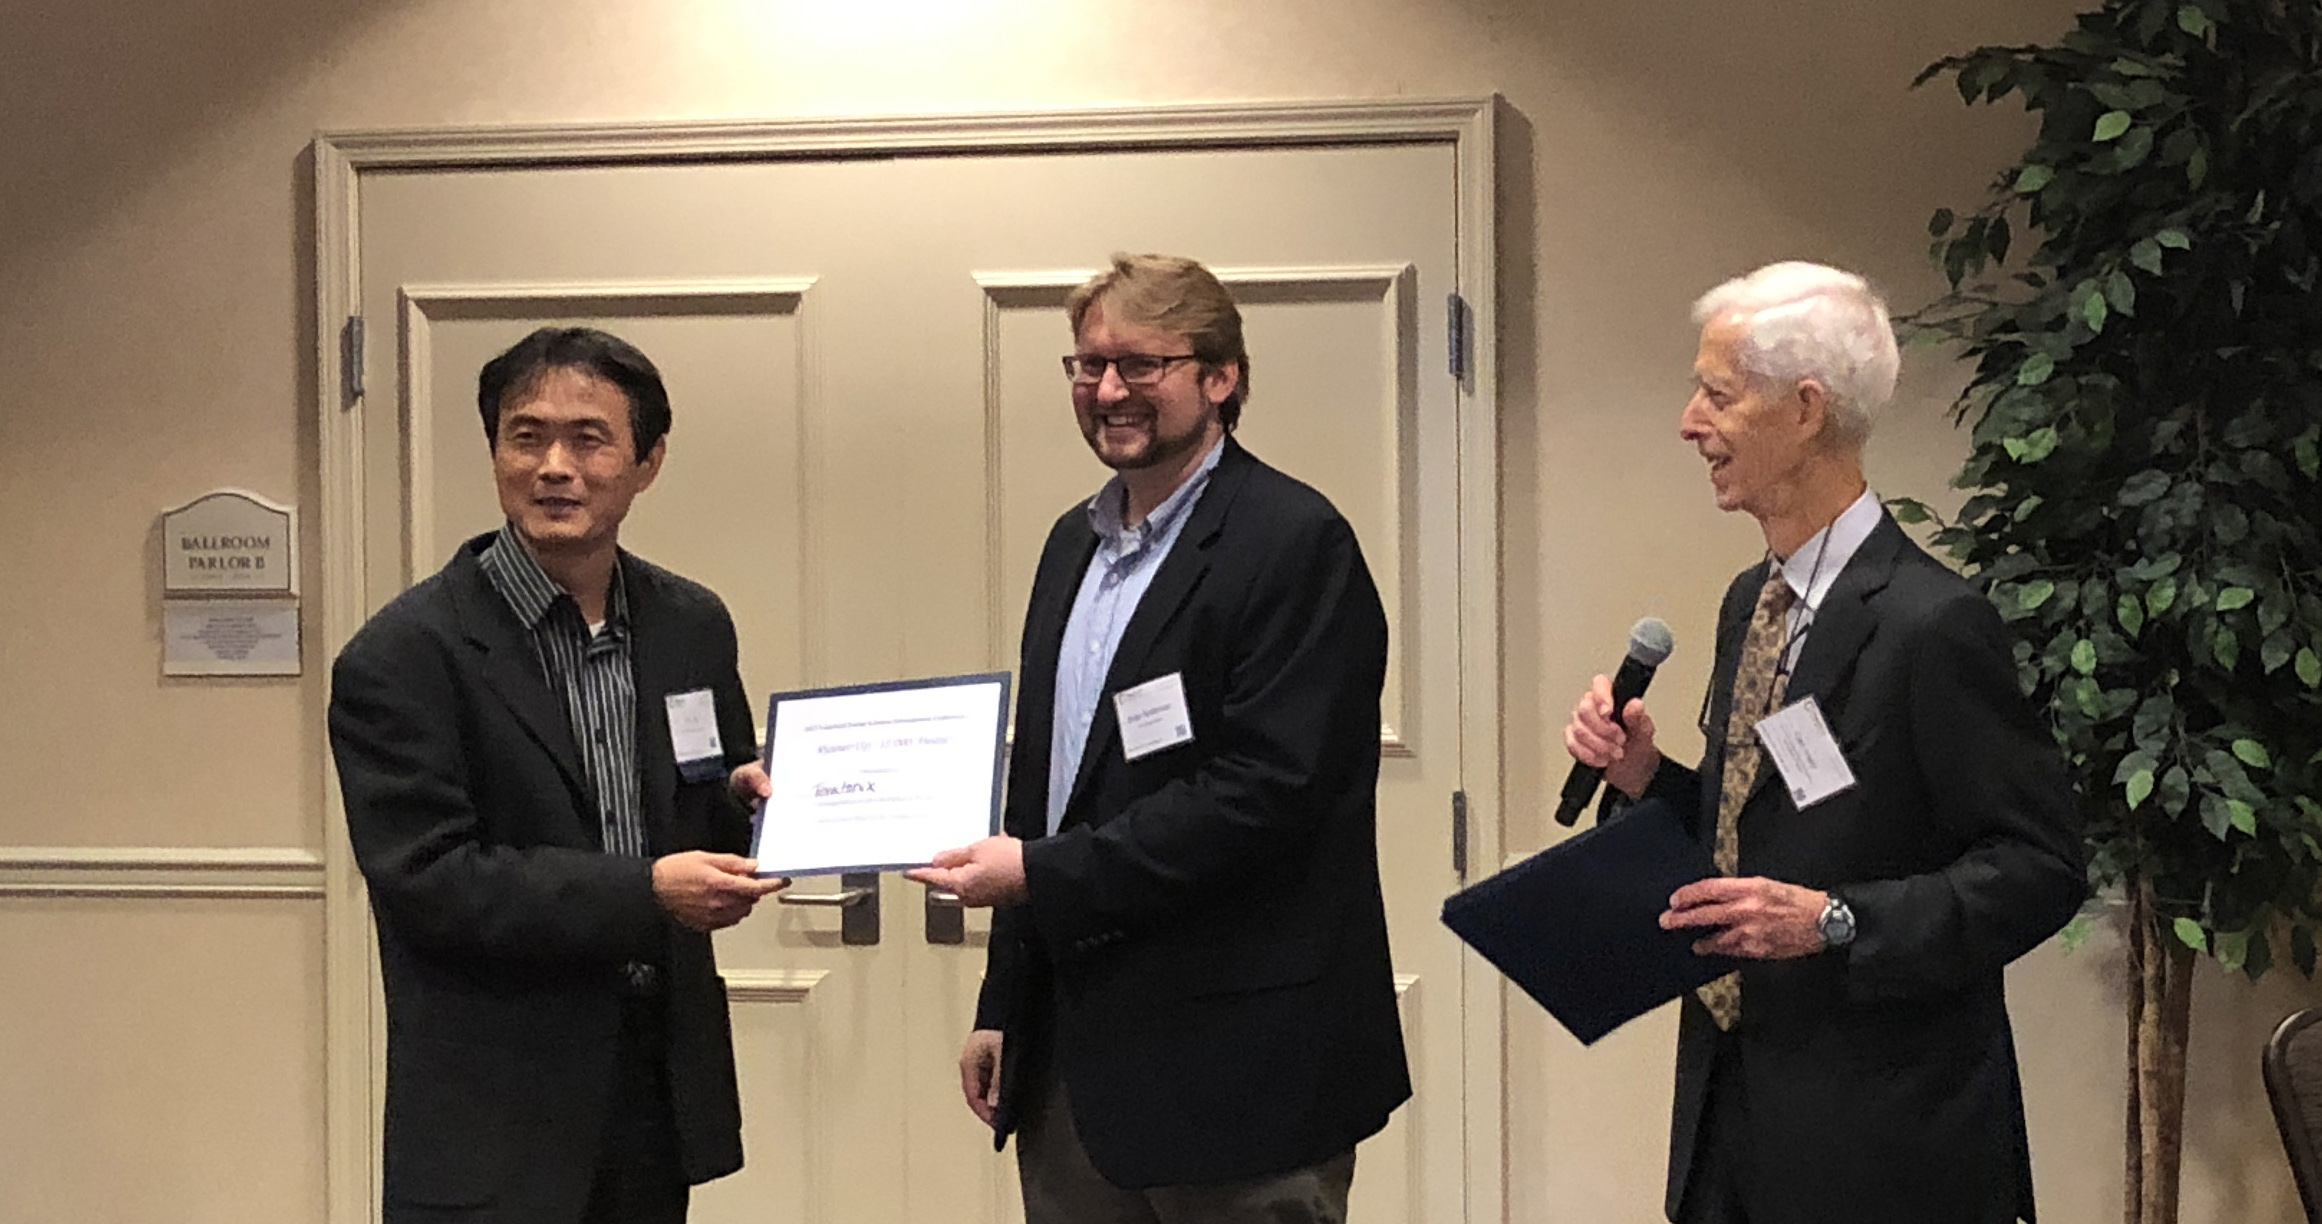 Teratonix, a maintenance-free solution that converts ambient radio waves to quickly generate electricity, placed third in the pitch competition—earning them $5,000. The company was founded by CMU Professor Yi Luo.